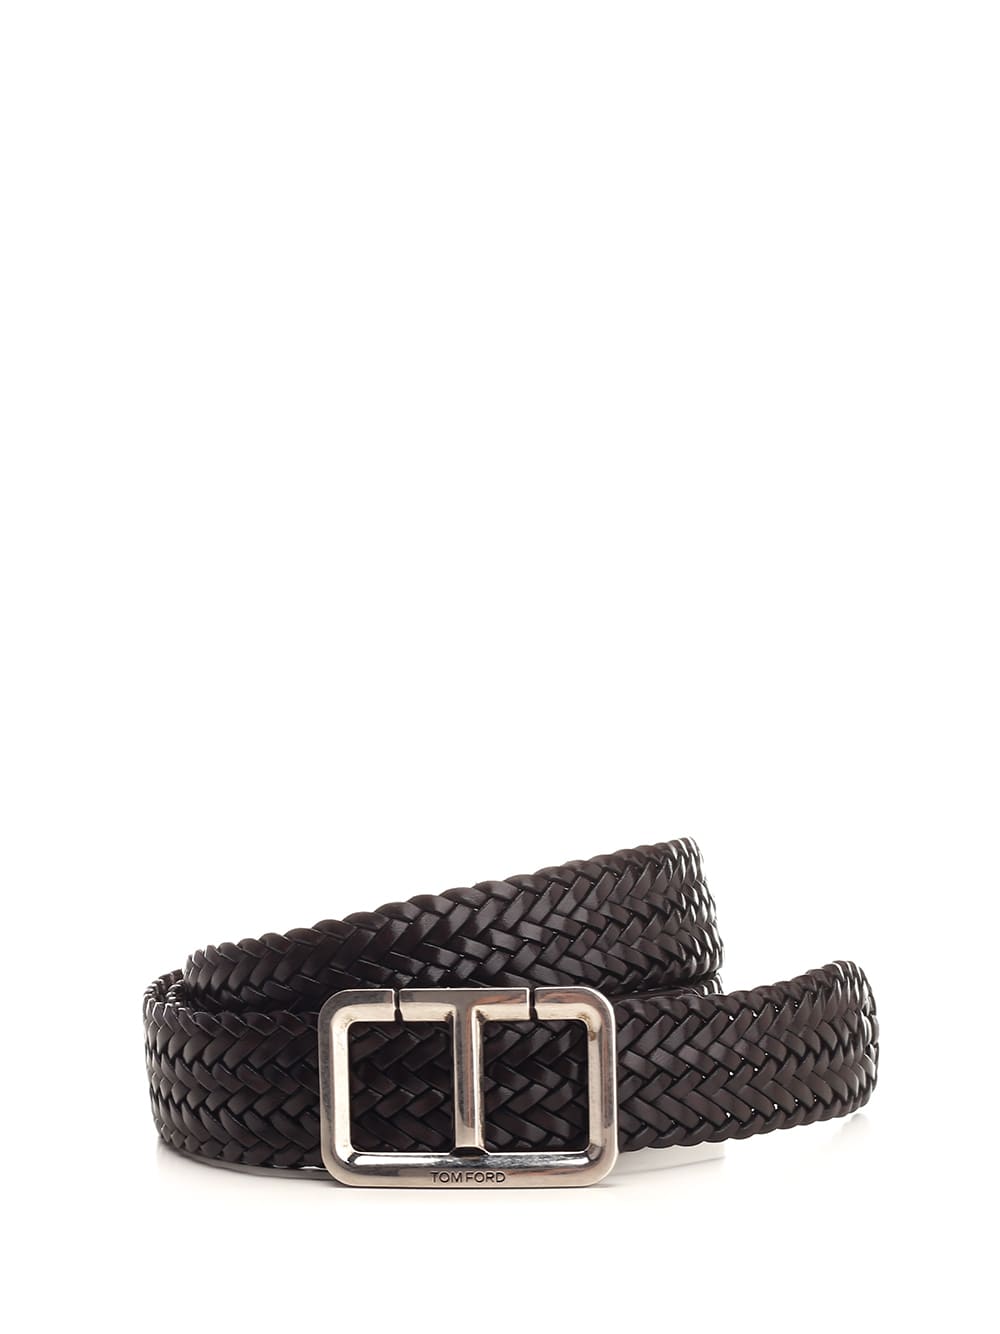 TOM FORD T BELT IN WOVEN LEATHER